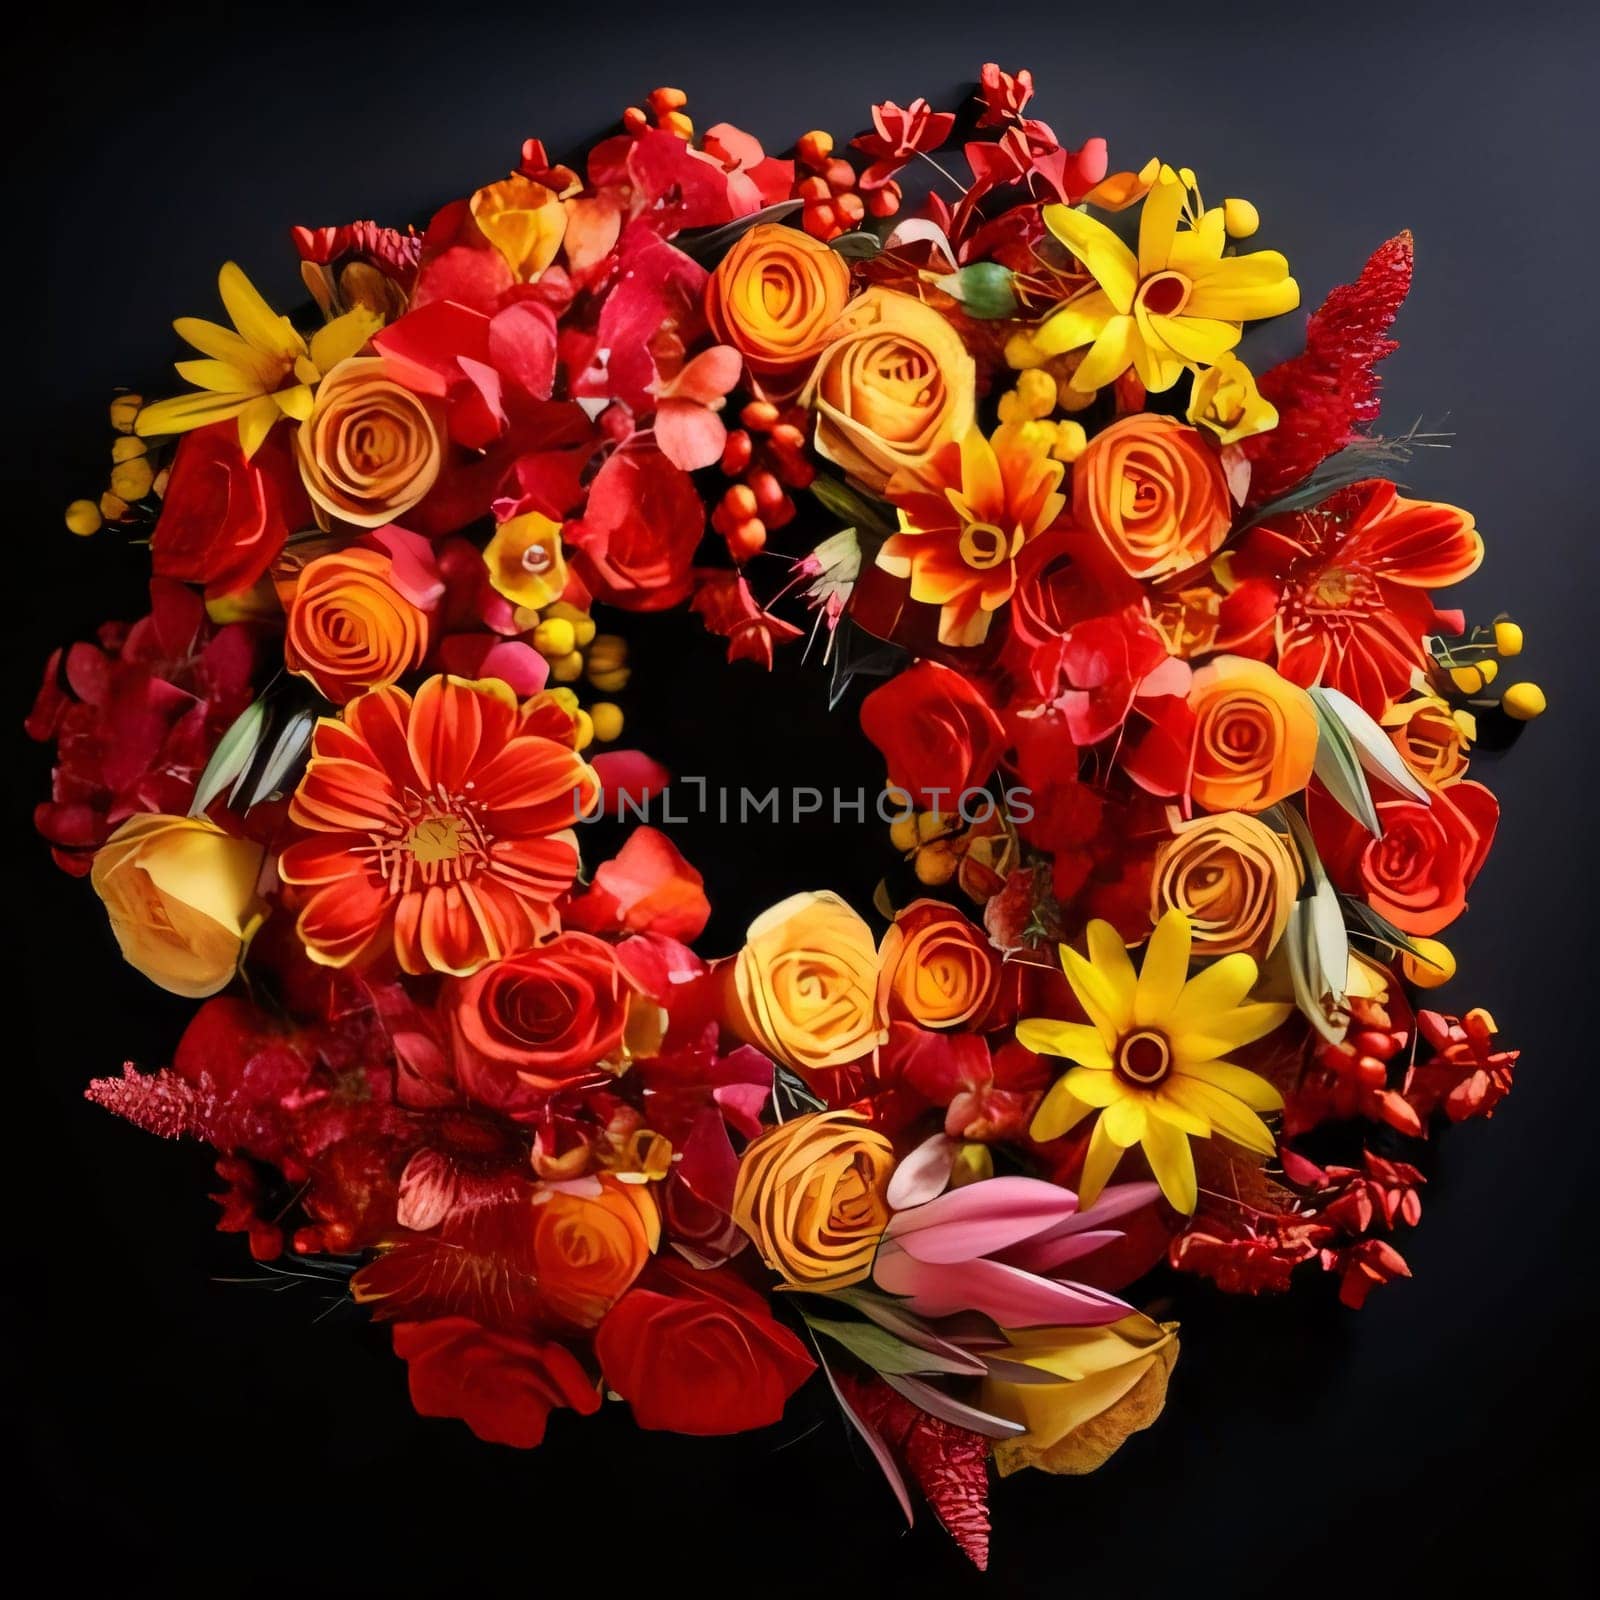 Round wreath of yellow and red flowers on a gray background. Flowering flowers, a symbol of spring, new life. A joyful time of nature waking up to life.